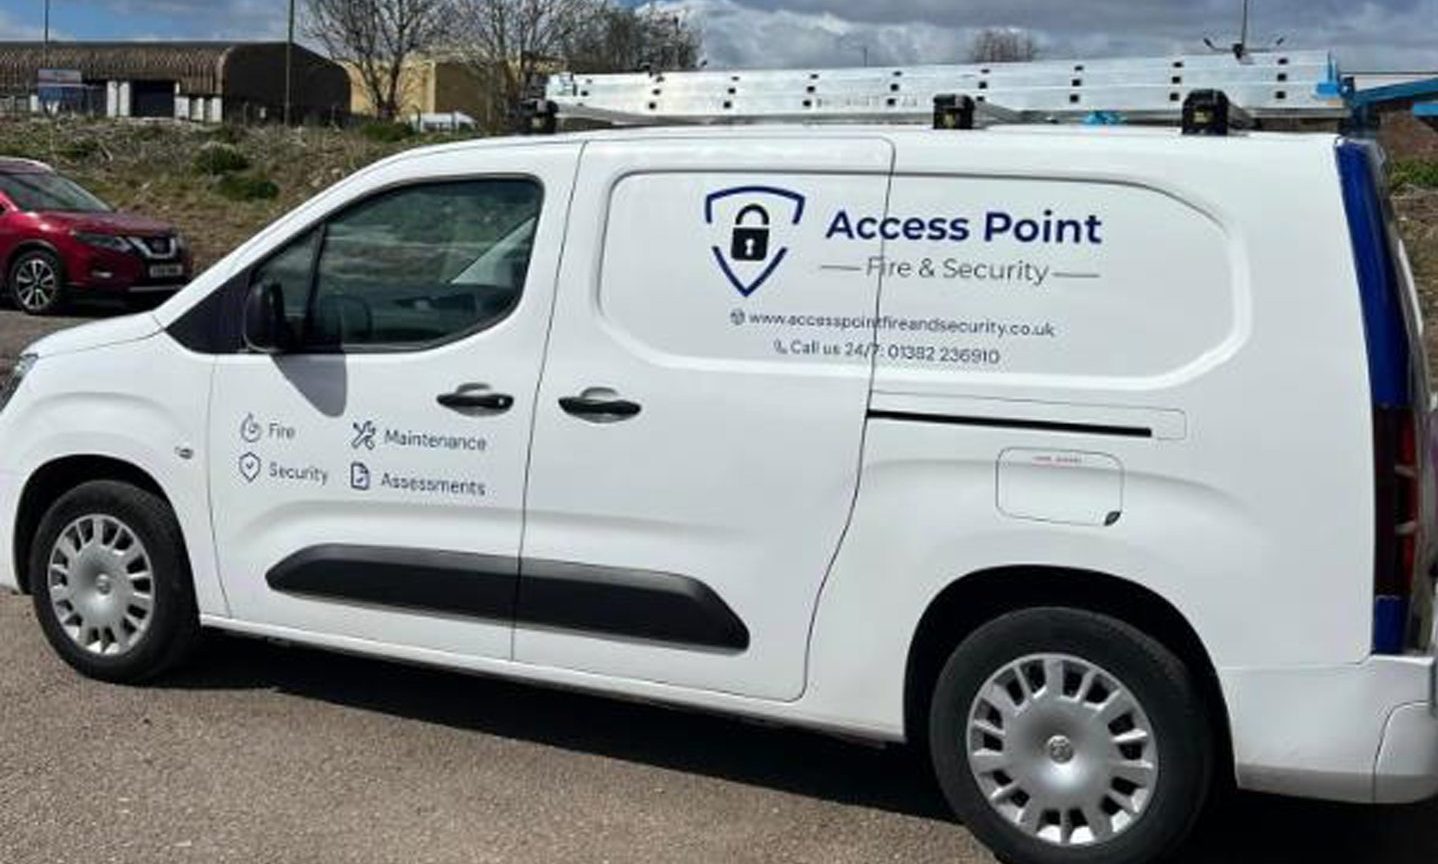 Matthew Nicoll's Access Point Fire and Security van.